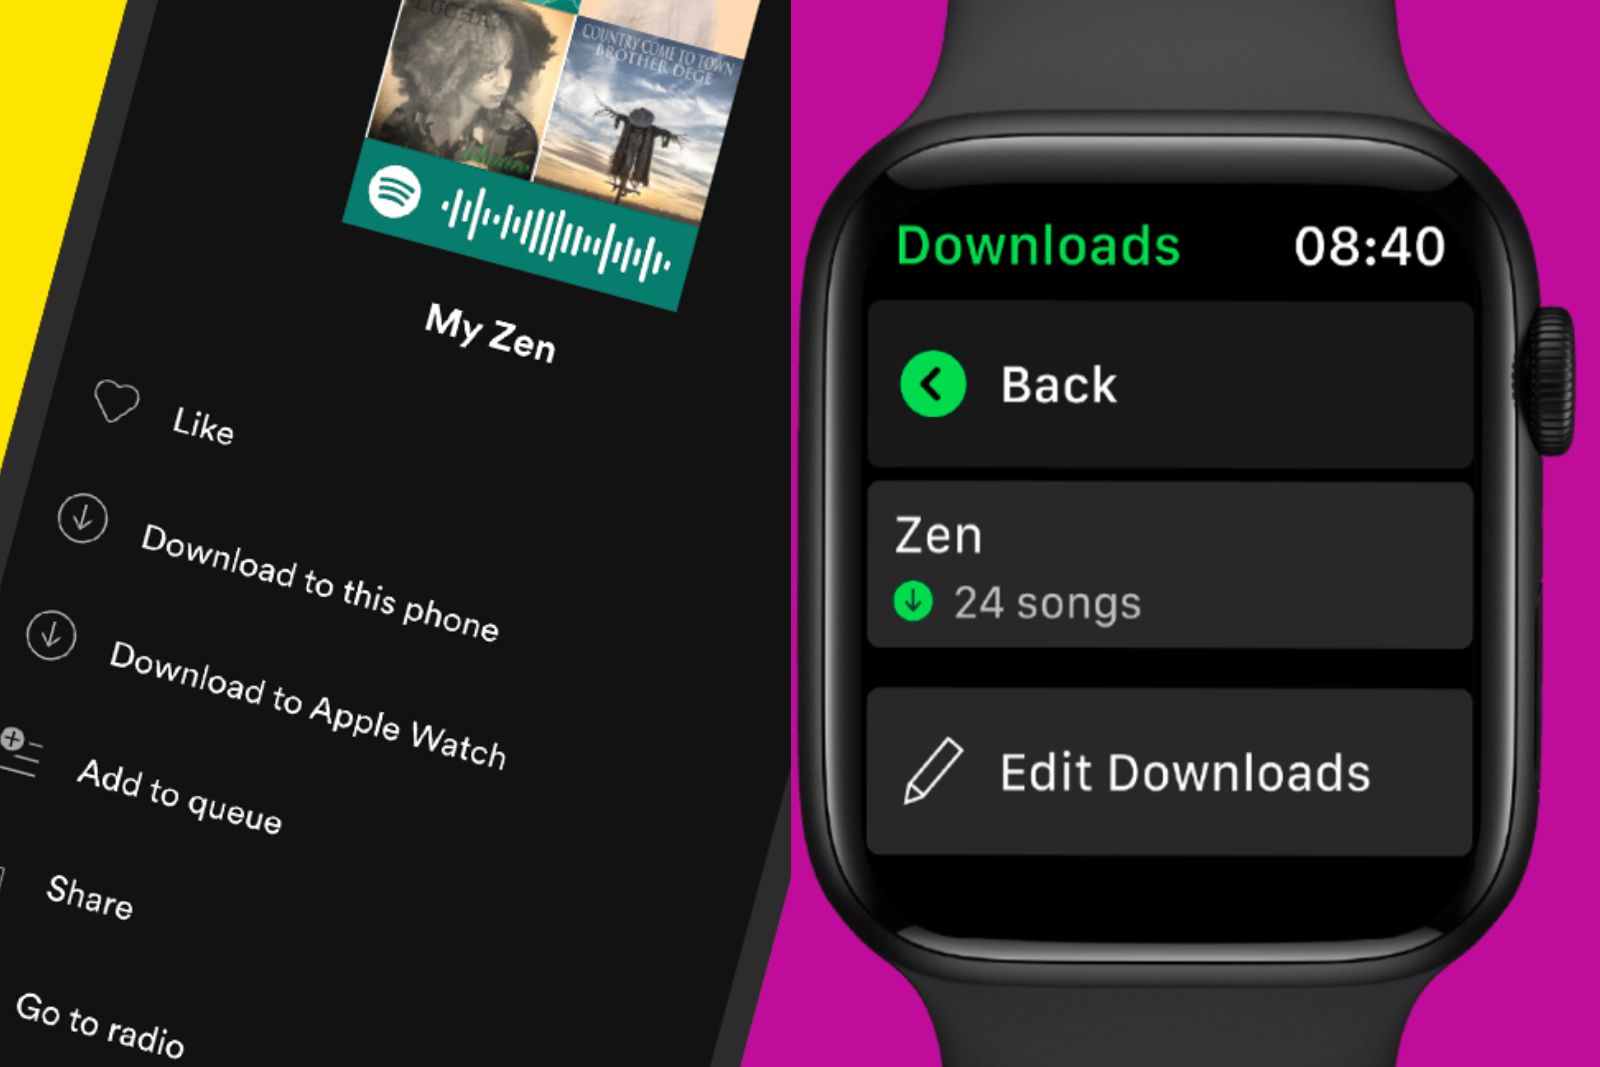 You can now download music offline using Spotify on Apple Watch photo 1